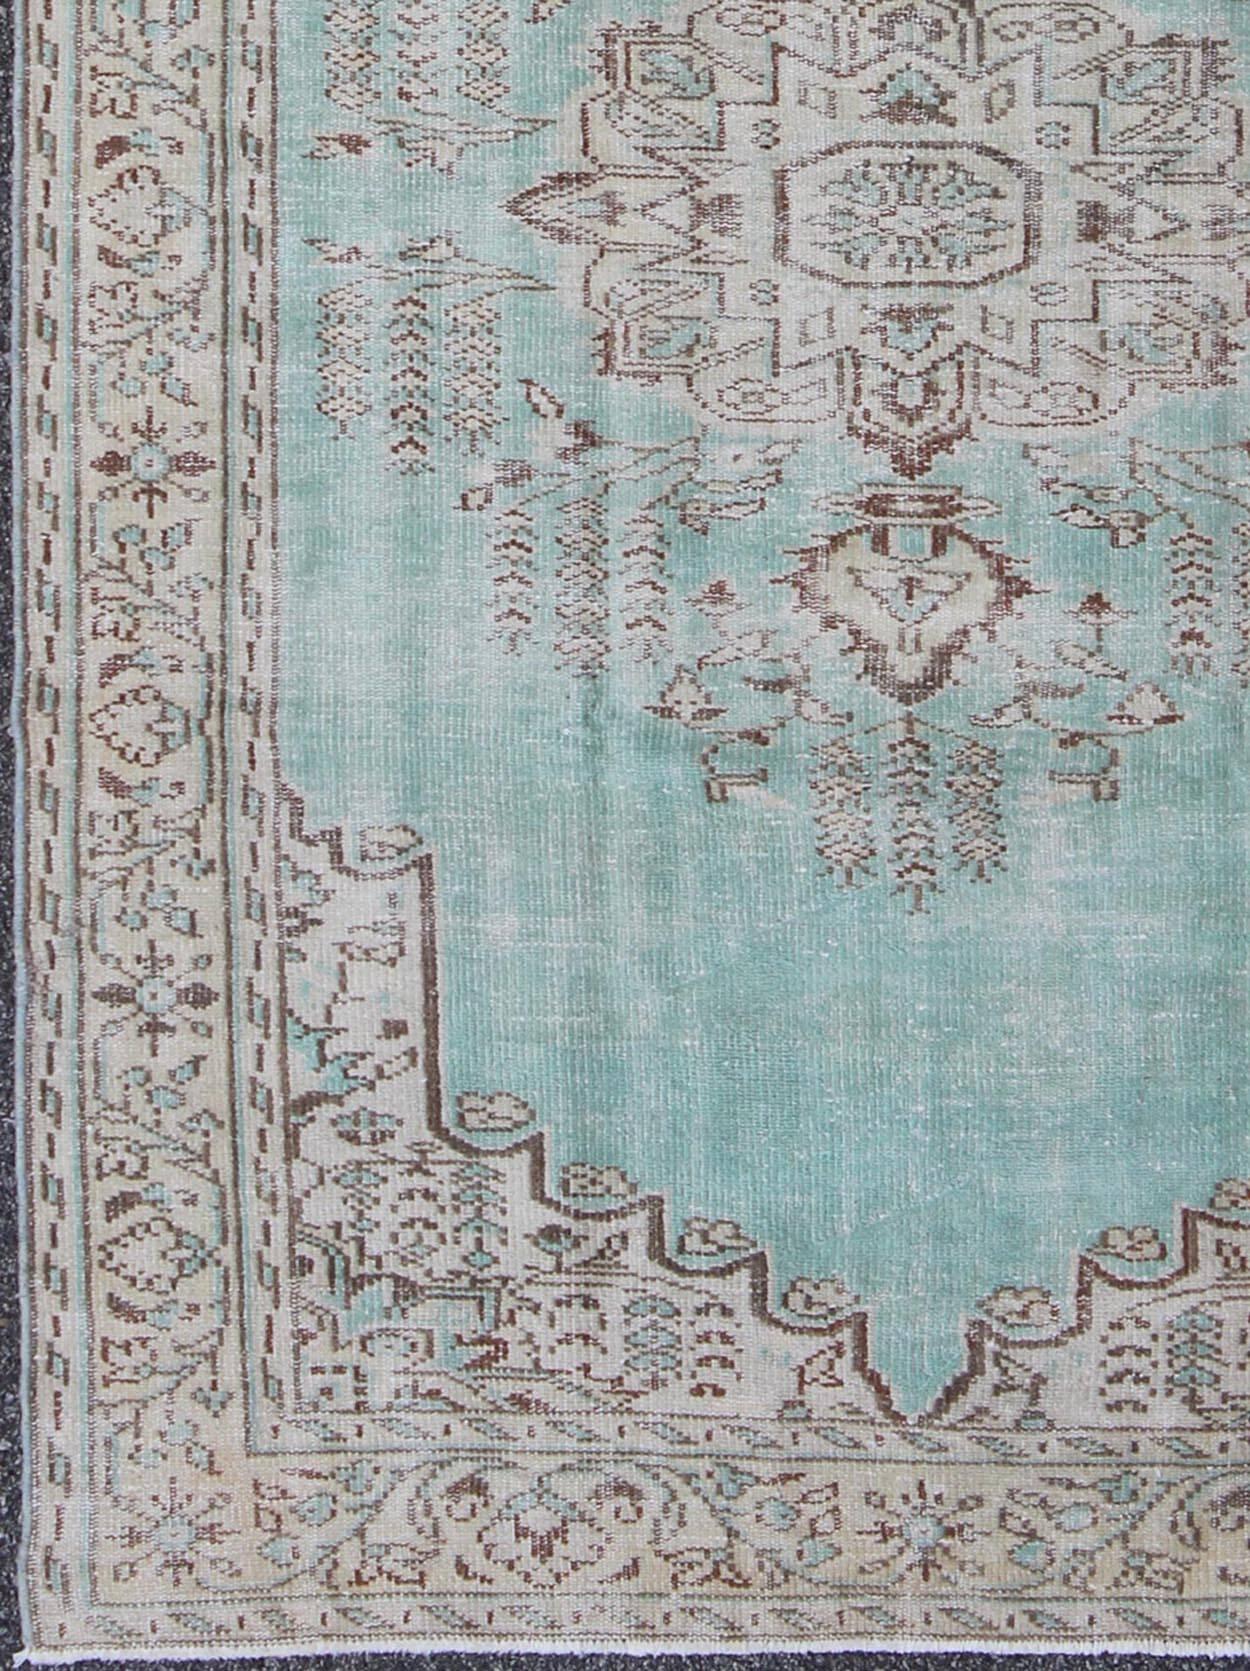 Vintage Oushak Rug with Aqua Color Background and Brown Highlights.
This Turkish Oushak rug displays a unique aqua blue as the main color background. Other colors include brown and light taupe. The bold and geometric design of this Turkish carpet is